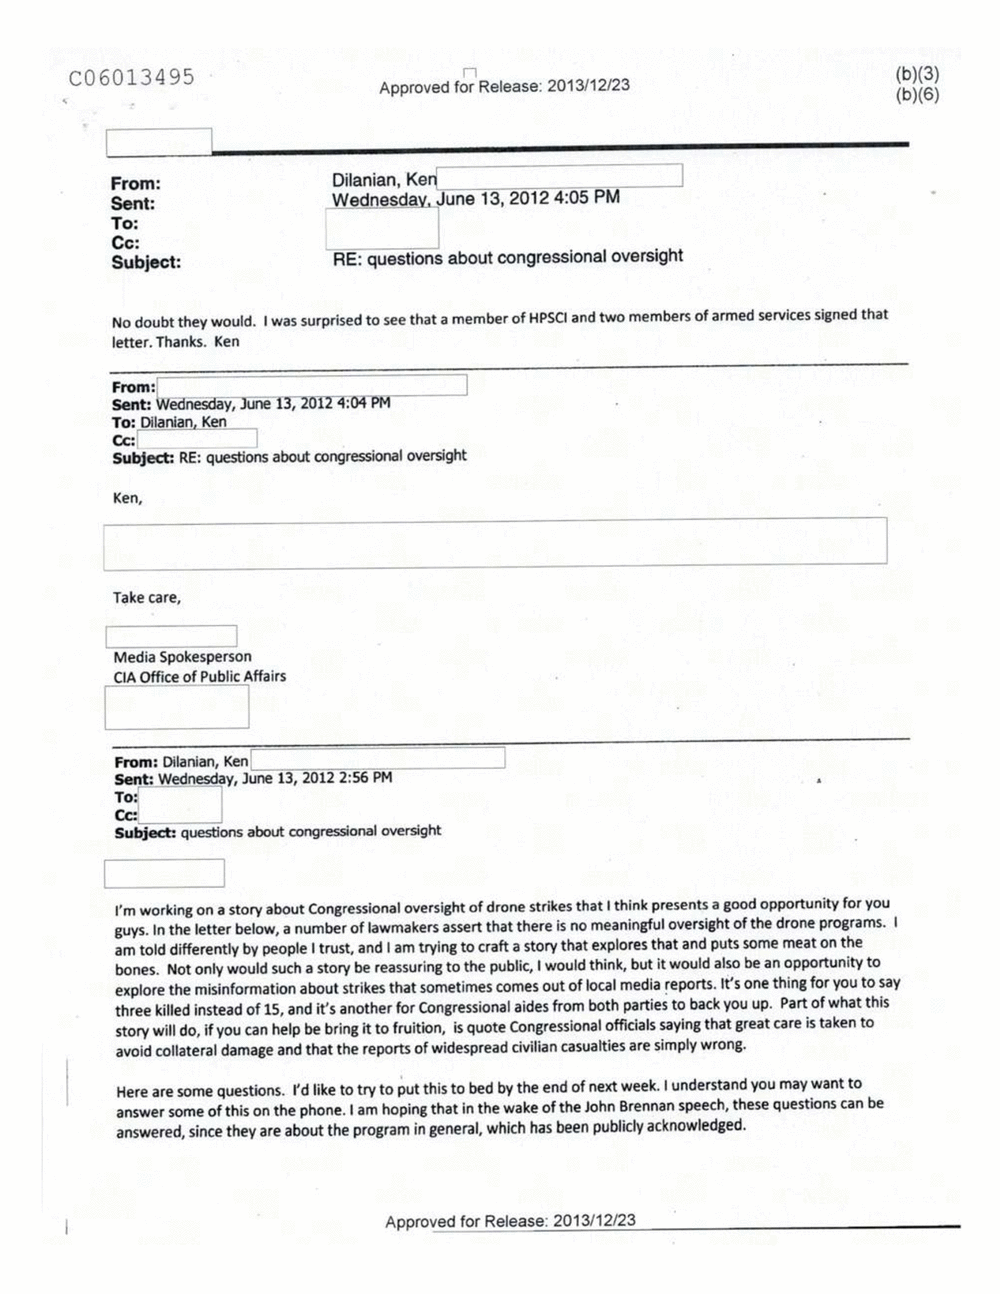 Page 346 from Email Correspondence Between Reporters and CIA Flacks